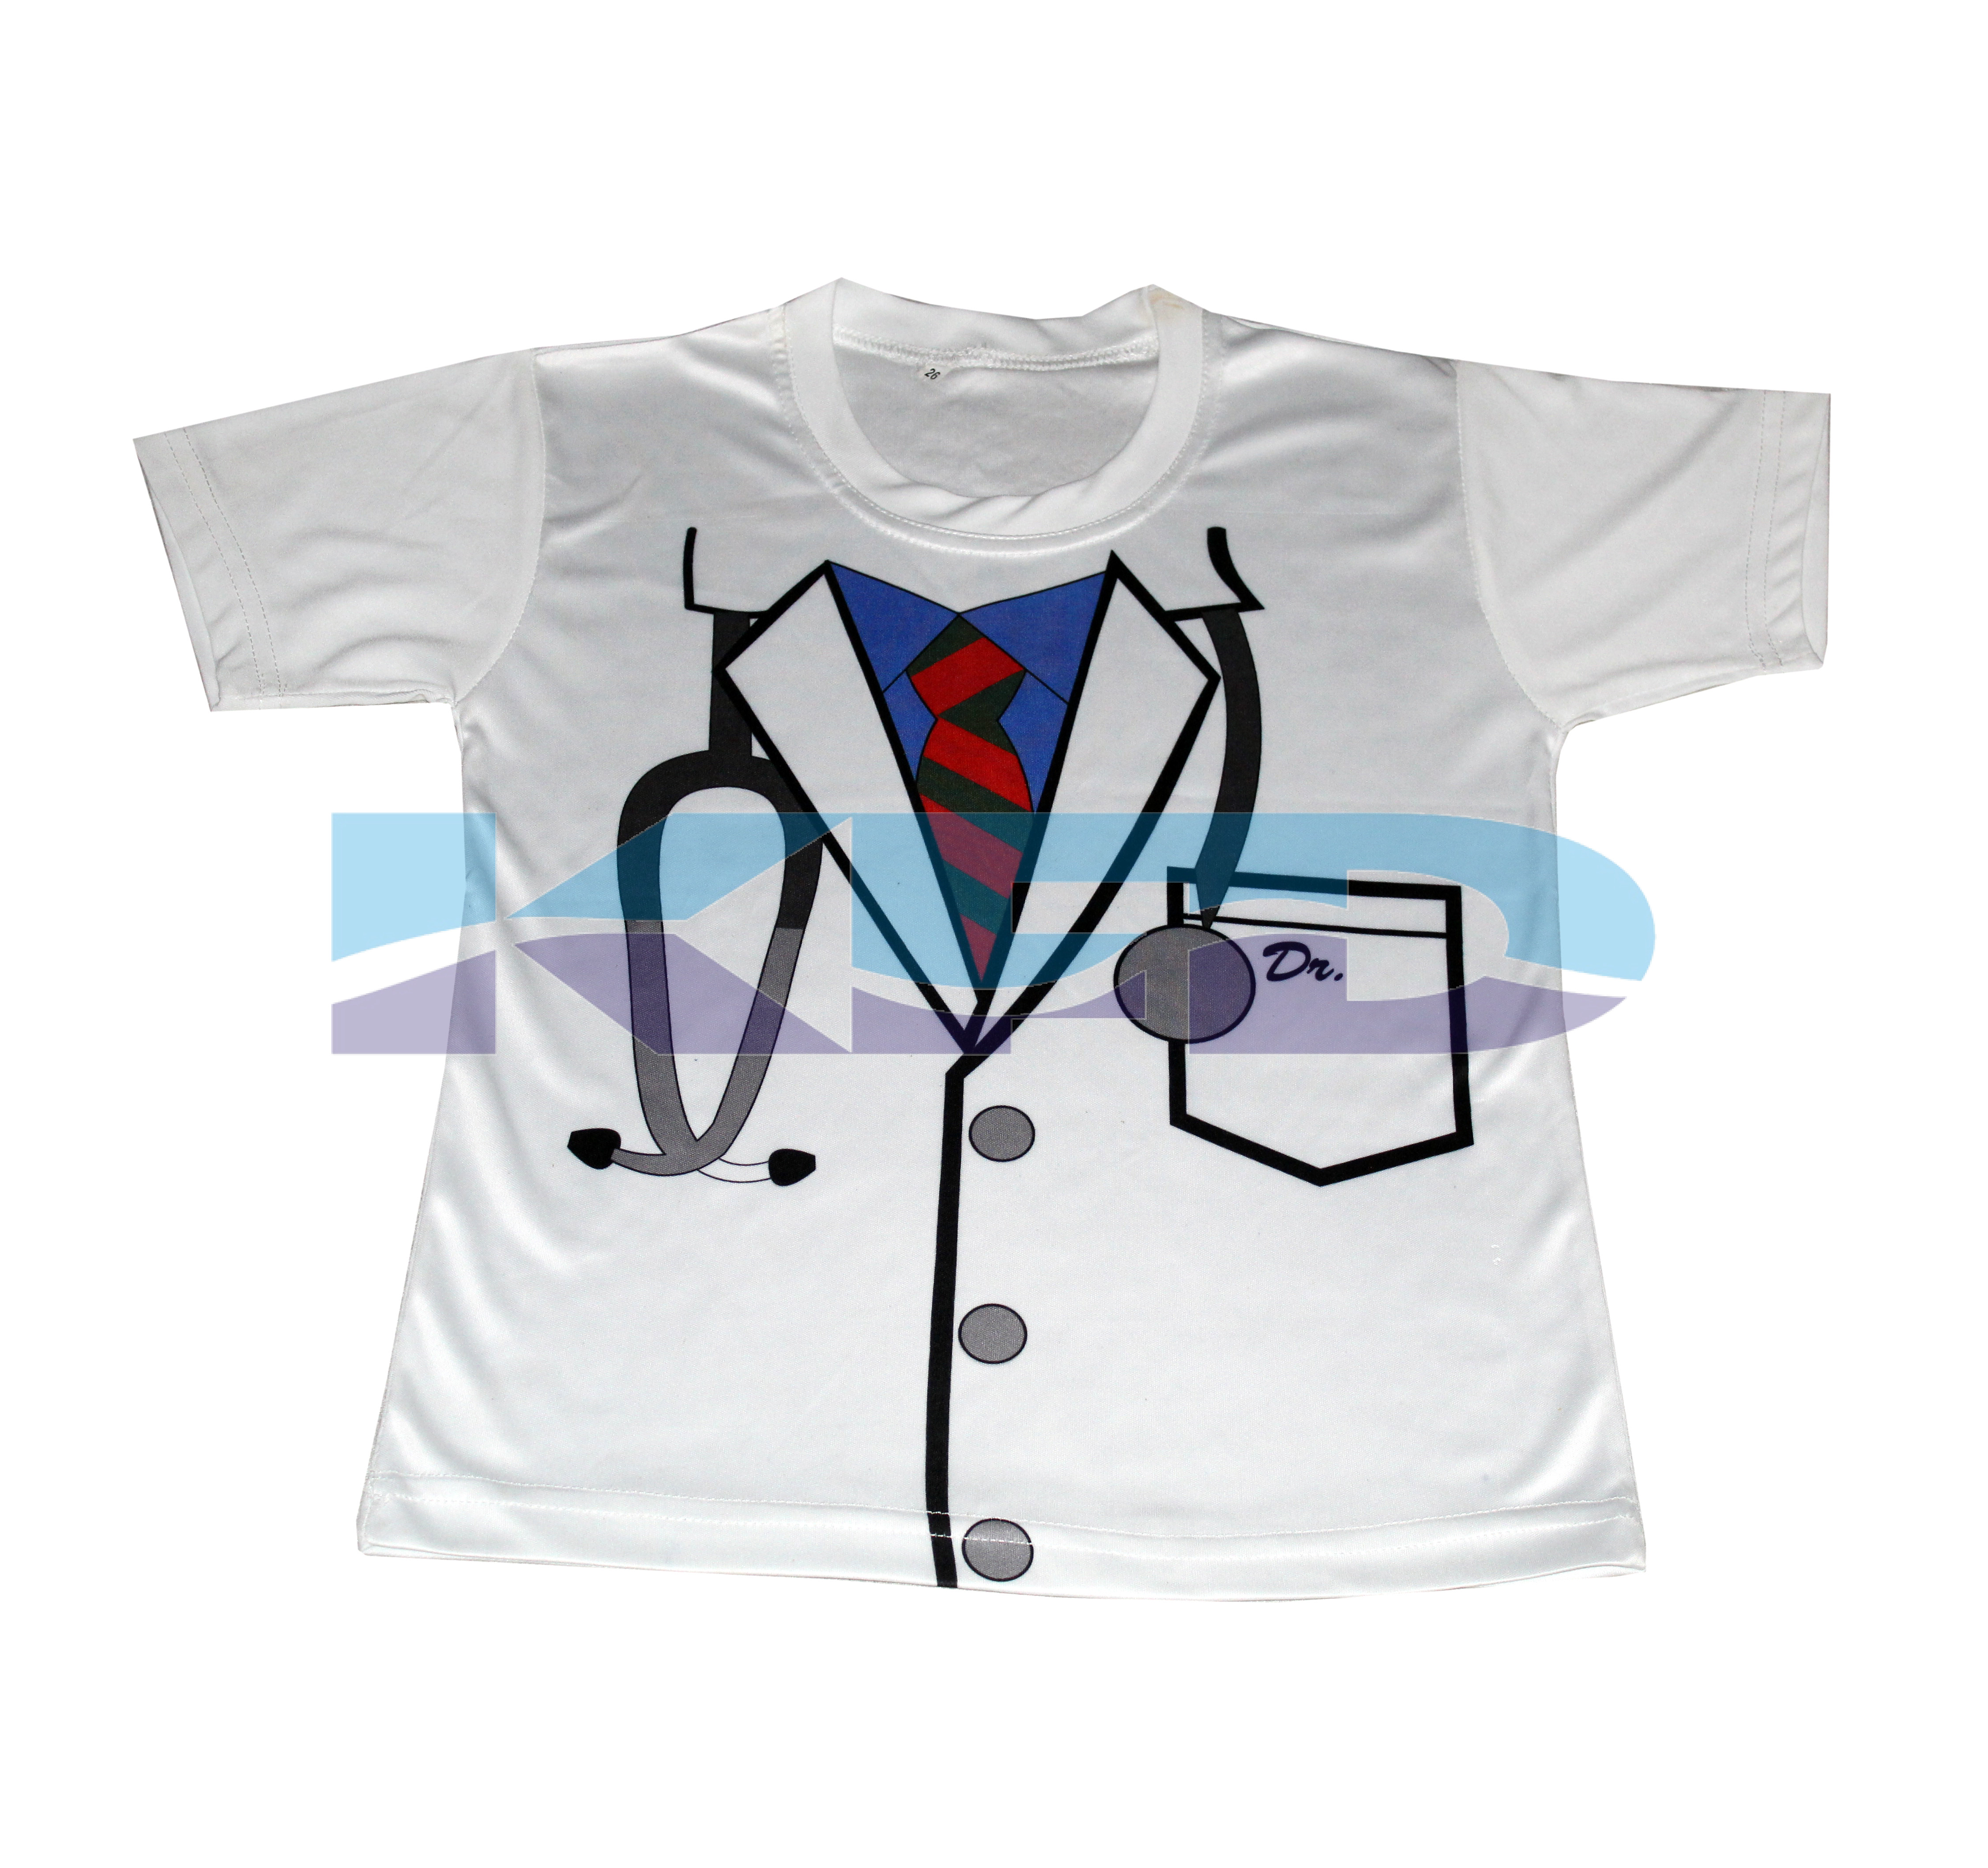  Doctor-T-Shirt fancy dress for kids,Western Costume for Annual function/Theme Party/Competition/Stage Shows/Birthday Party Dress